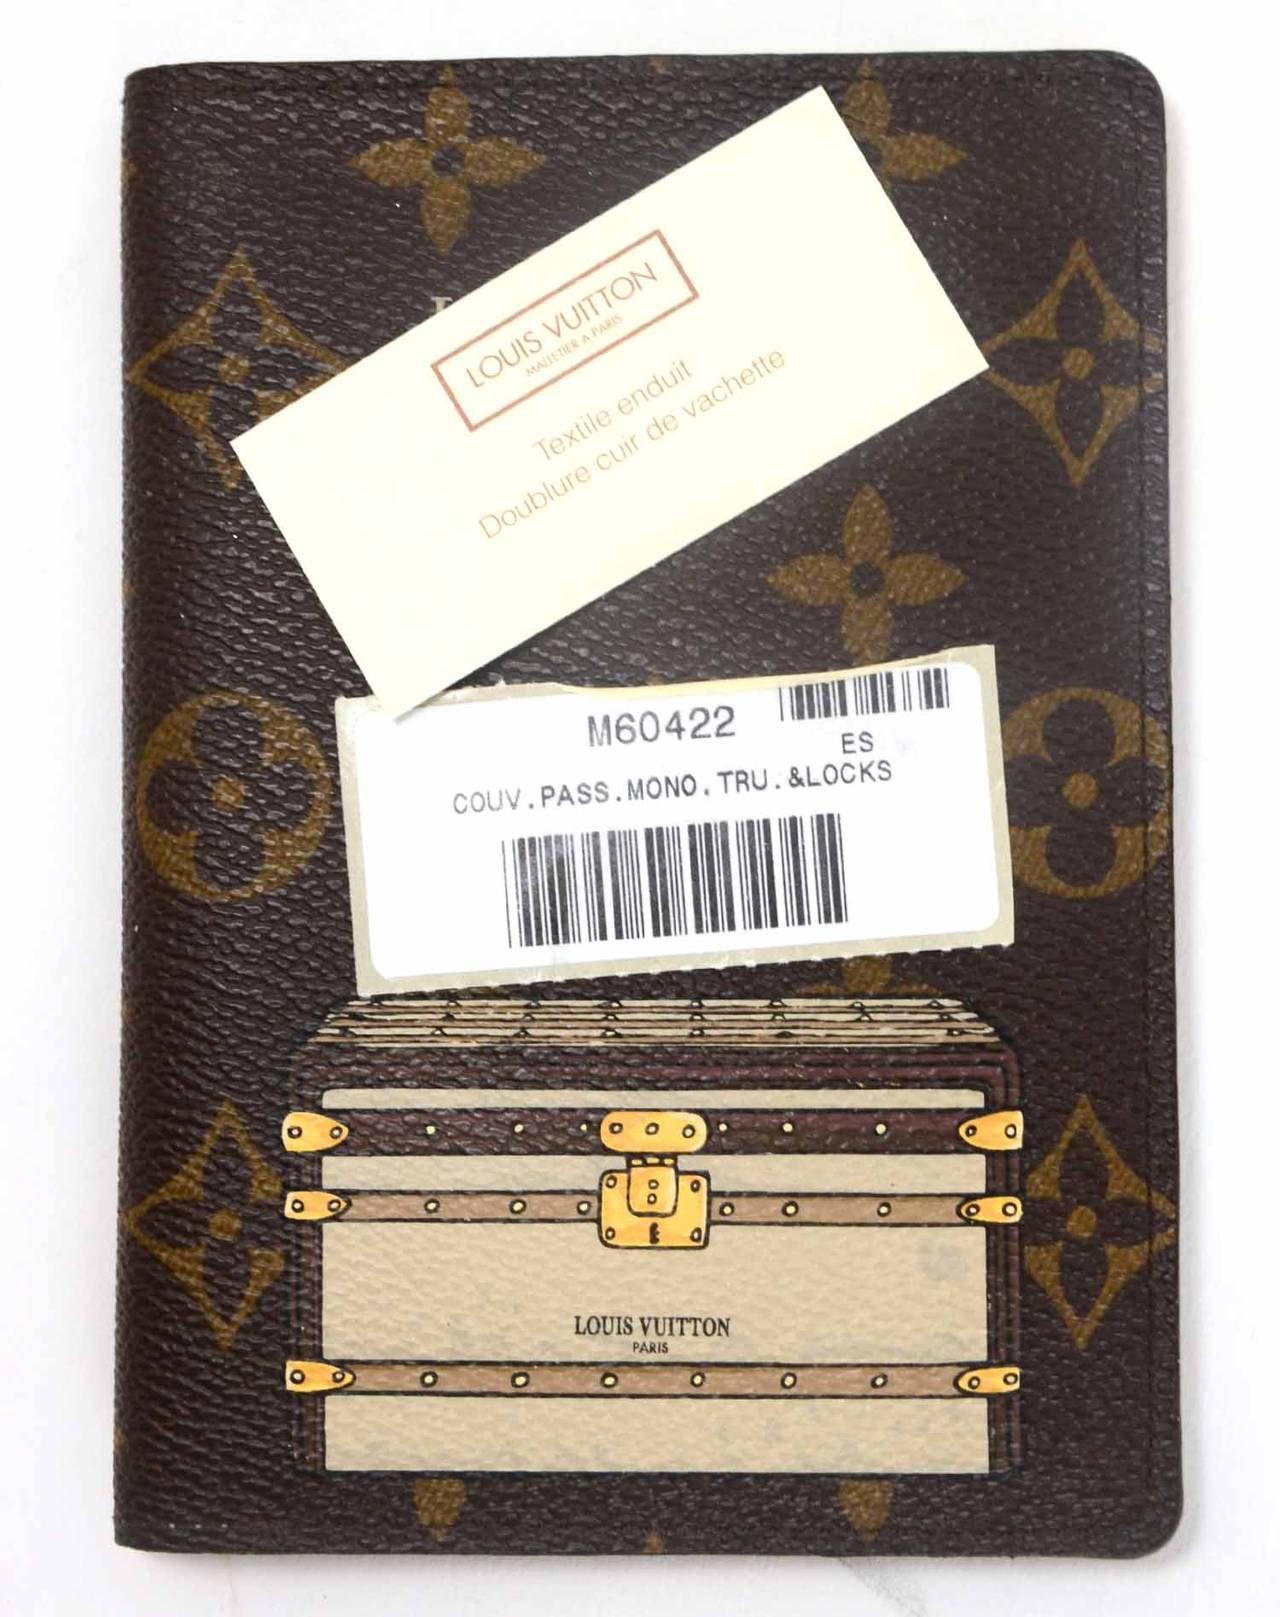 LOUIS VUITTON Monogram Limited Edition Trunks and Locks Passport Cover c.'13